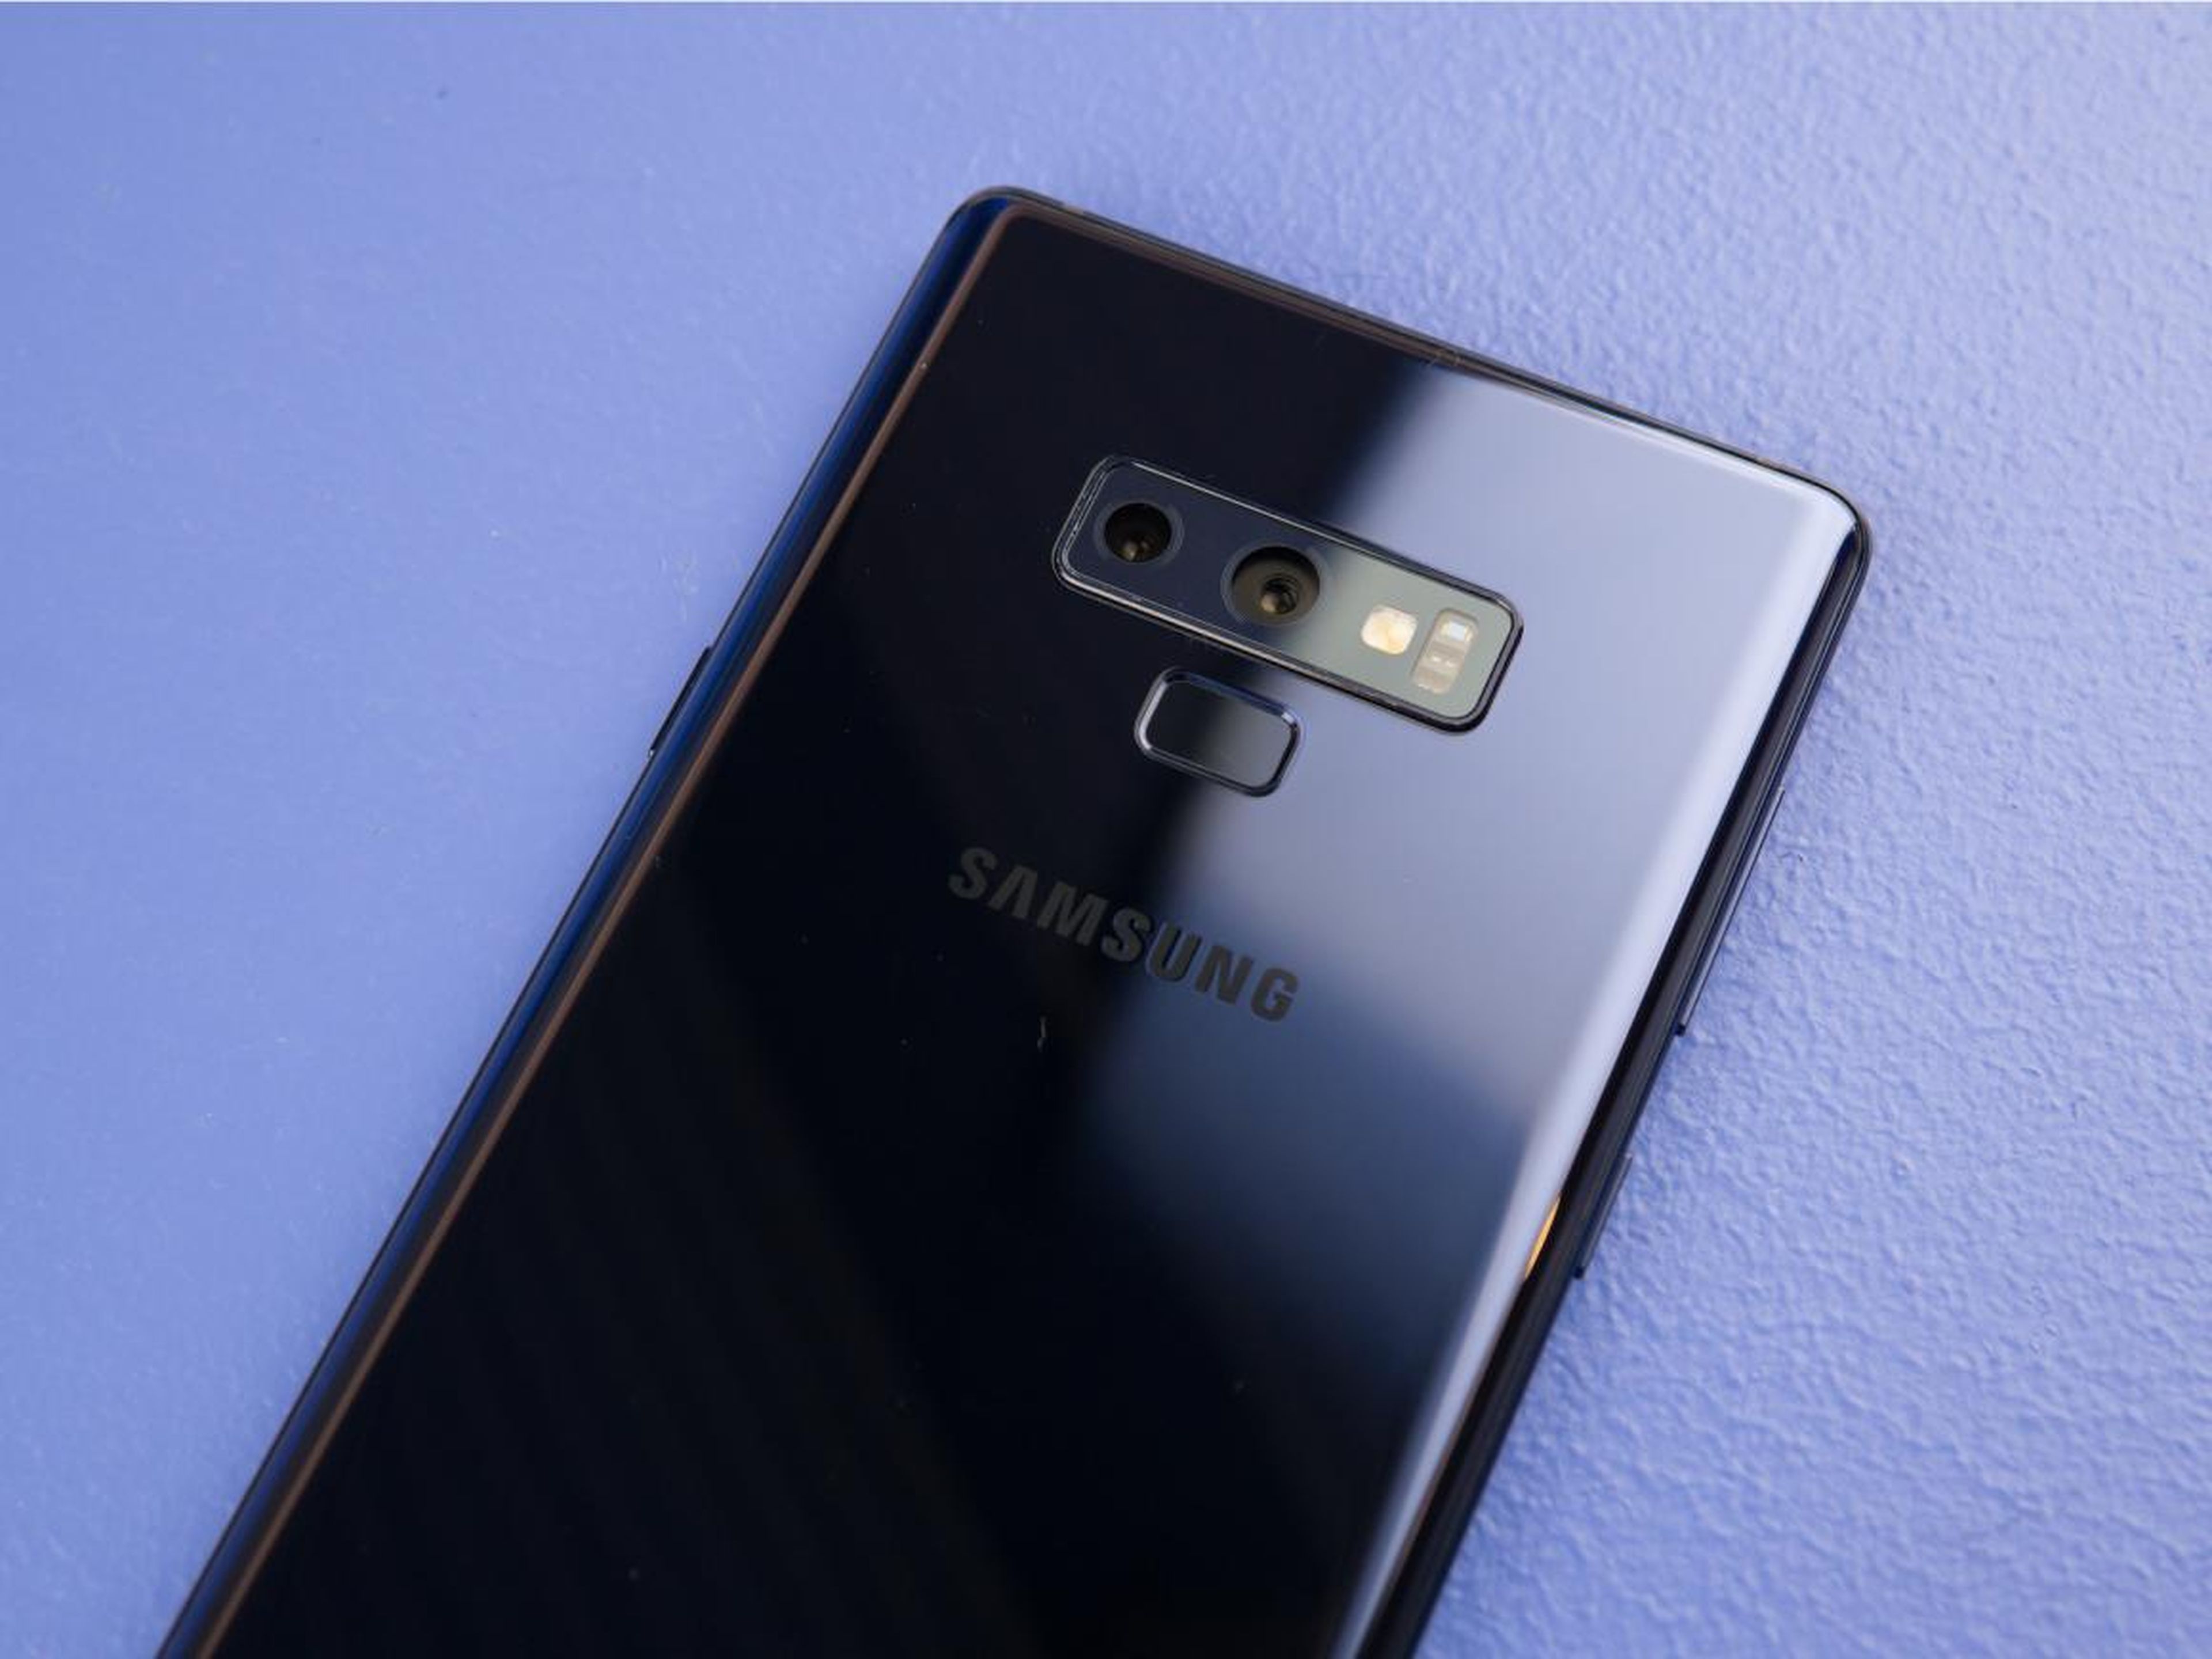 The design feels stale, but there are a few things I love about the look and feel of the Galaxy Note 9.